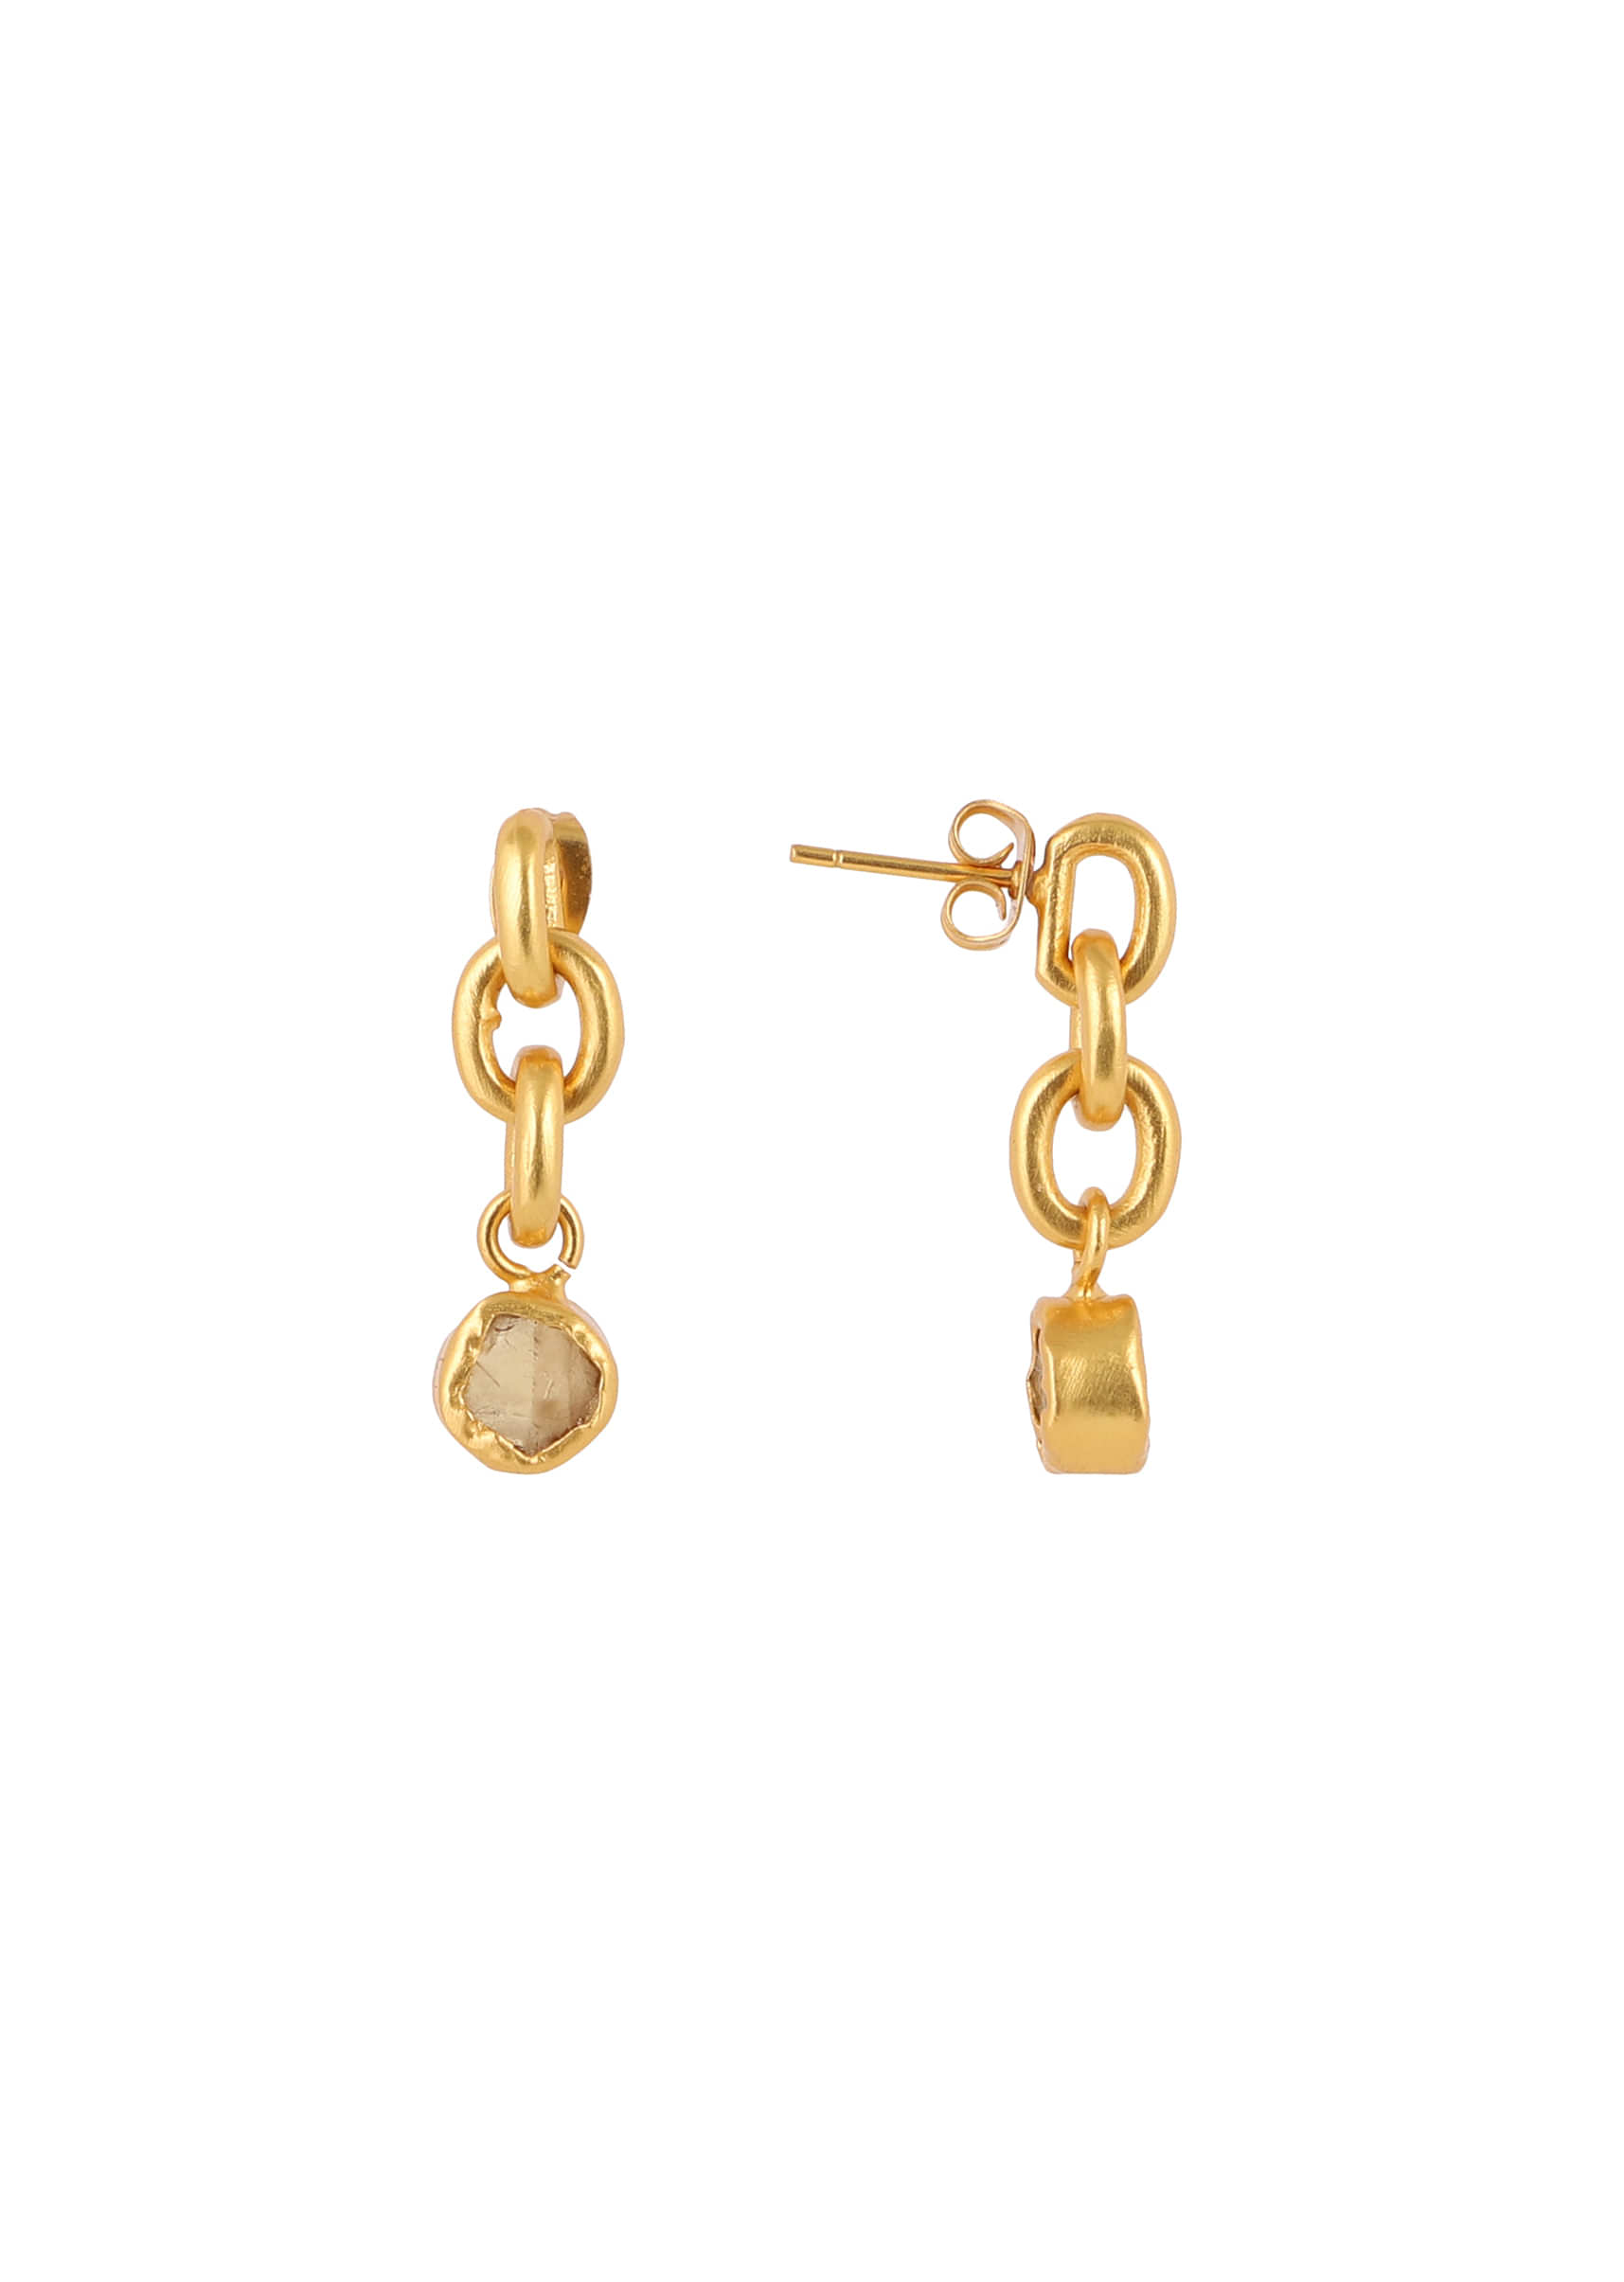 Gold Plated Earrings In A Chunky Link Chain Design With A Rough Citrine Stone By Zariin